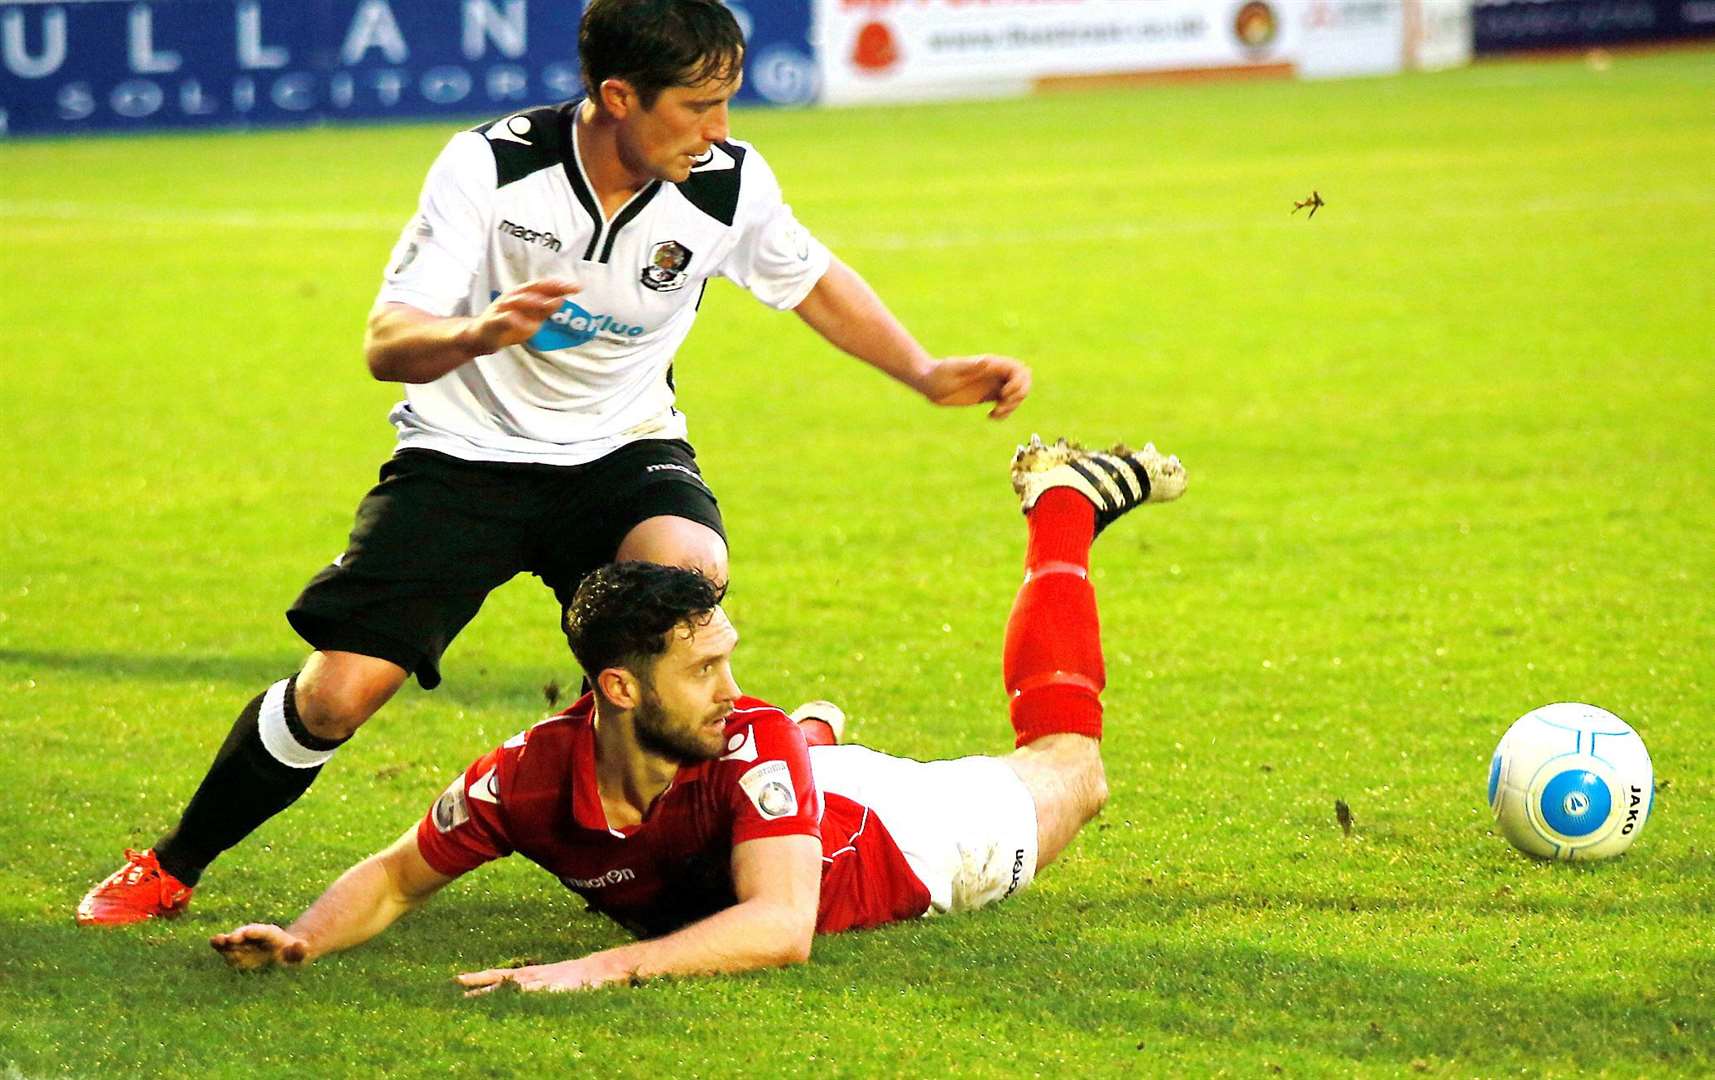 The Boxing Day derby between Ebbsfleet United and Dartford is off due to Covid-19 Picture: Phil Lee